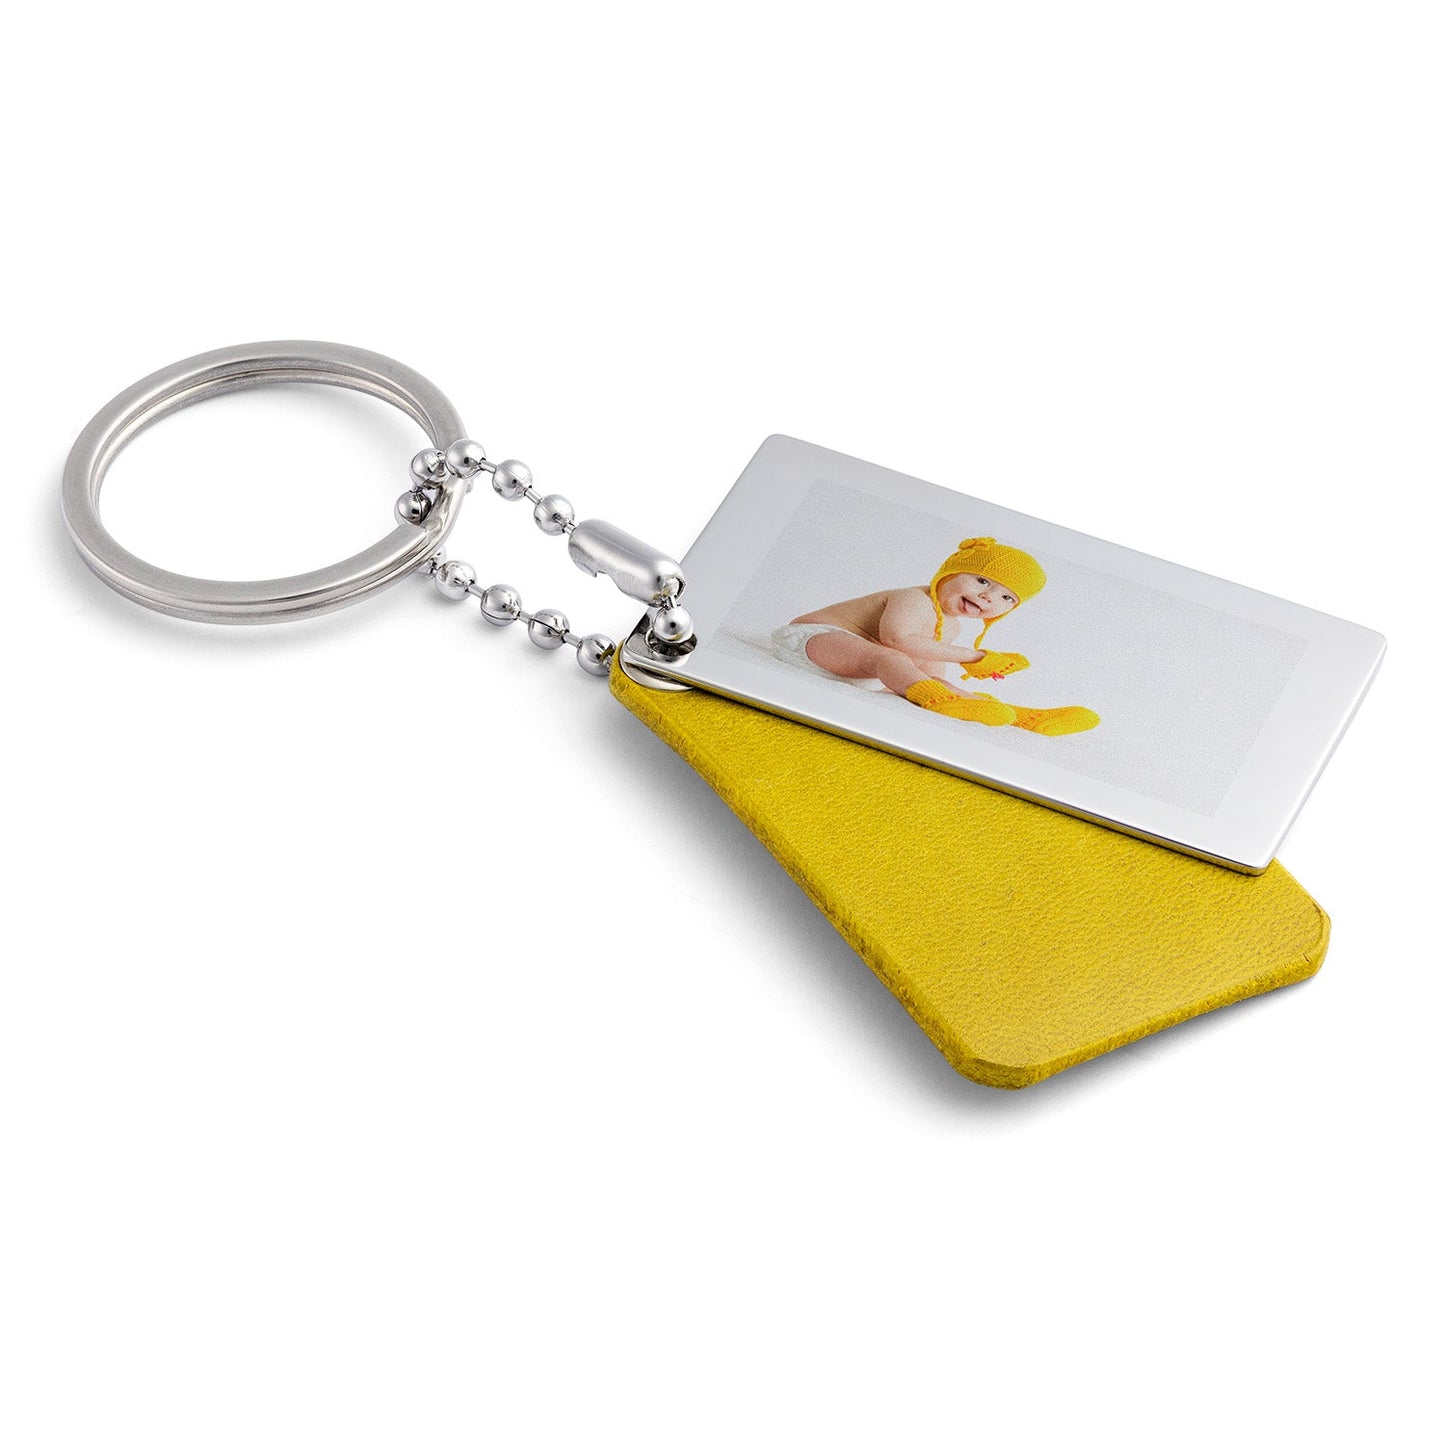 Yellow Leather Keyring with Photo and Engraving - seQua.Shop